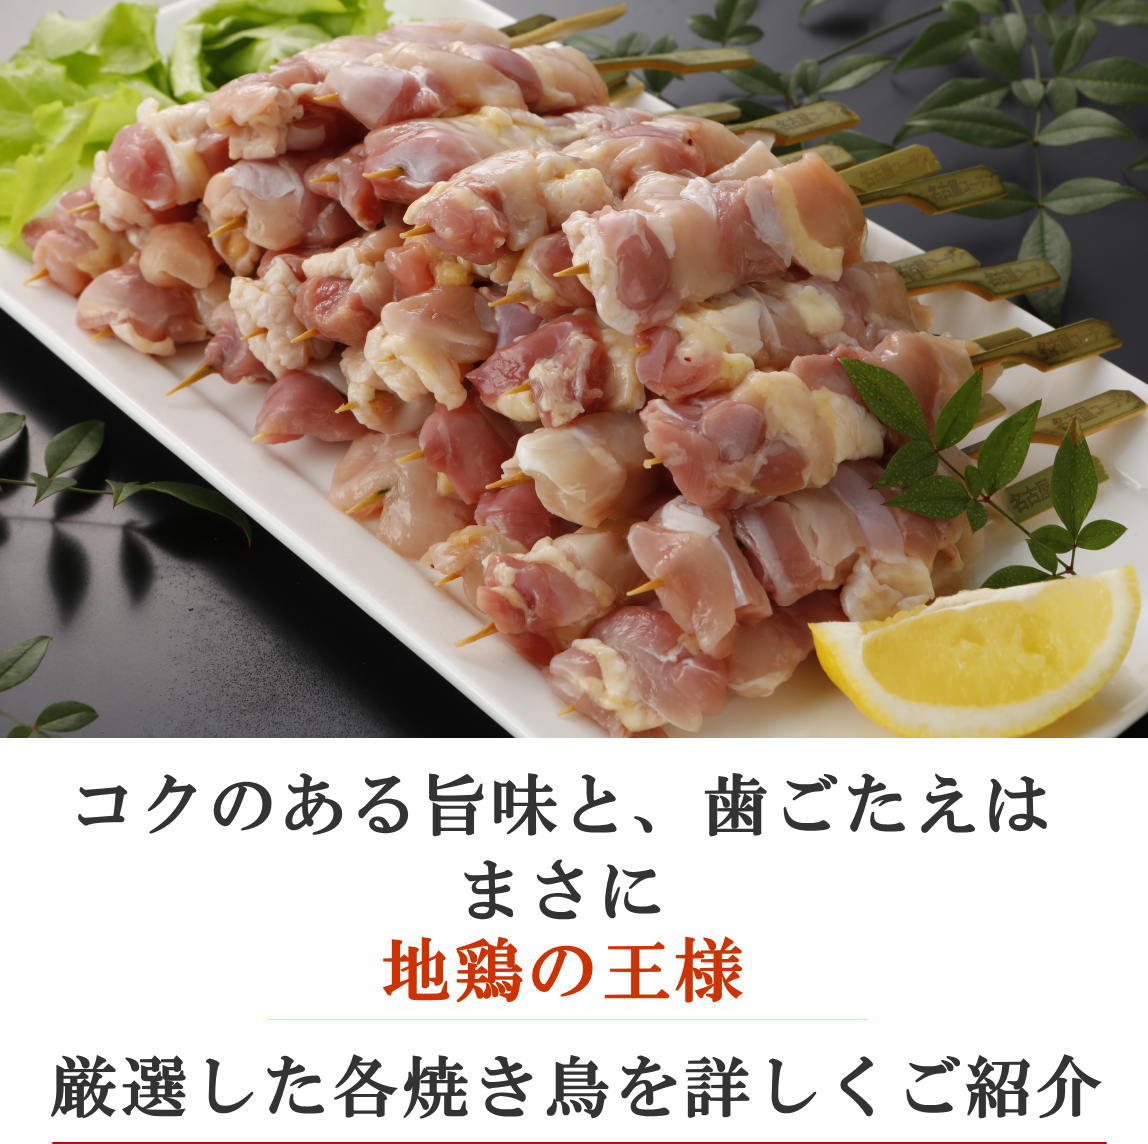  Father's day Bon Festival gift Nagoya Coach n boneless meat with skin .(.. breast .) total 30ps.@ inside festival ..... present inside festival . roasting bird chicken thighs domestic production high class ground chicken roasting bird .. sause 